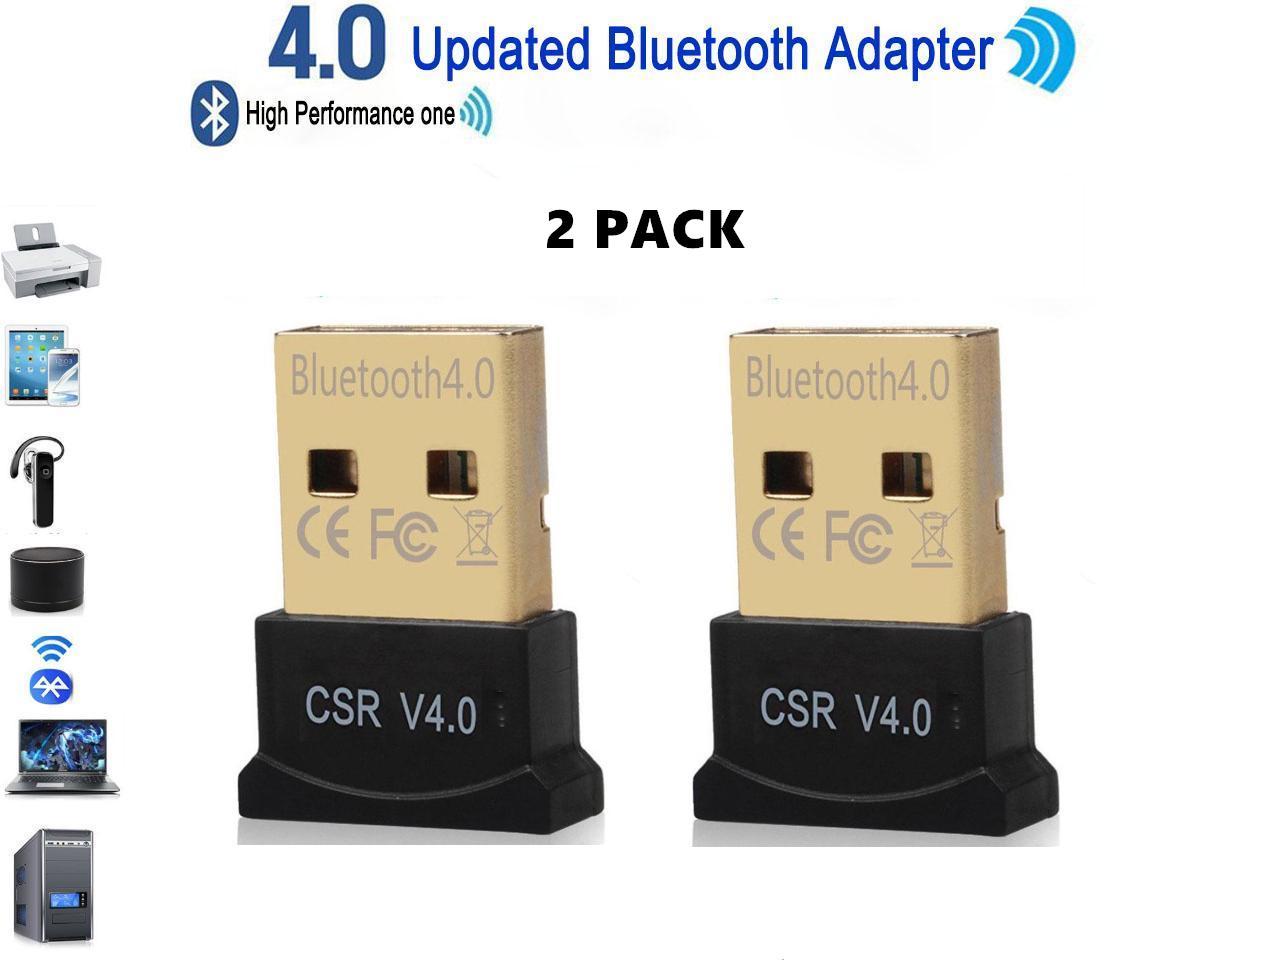 1*Wireless Bluetooth Dongle USB Car Adapter Reciever For PC iPod PDA Computer 